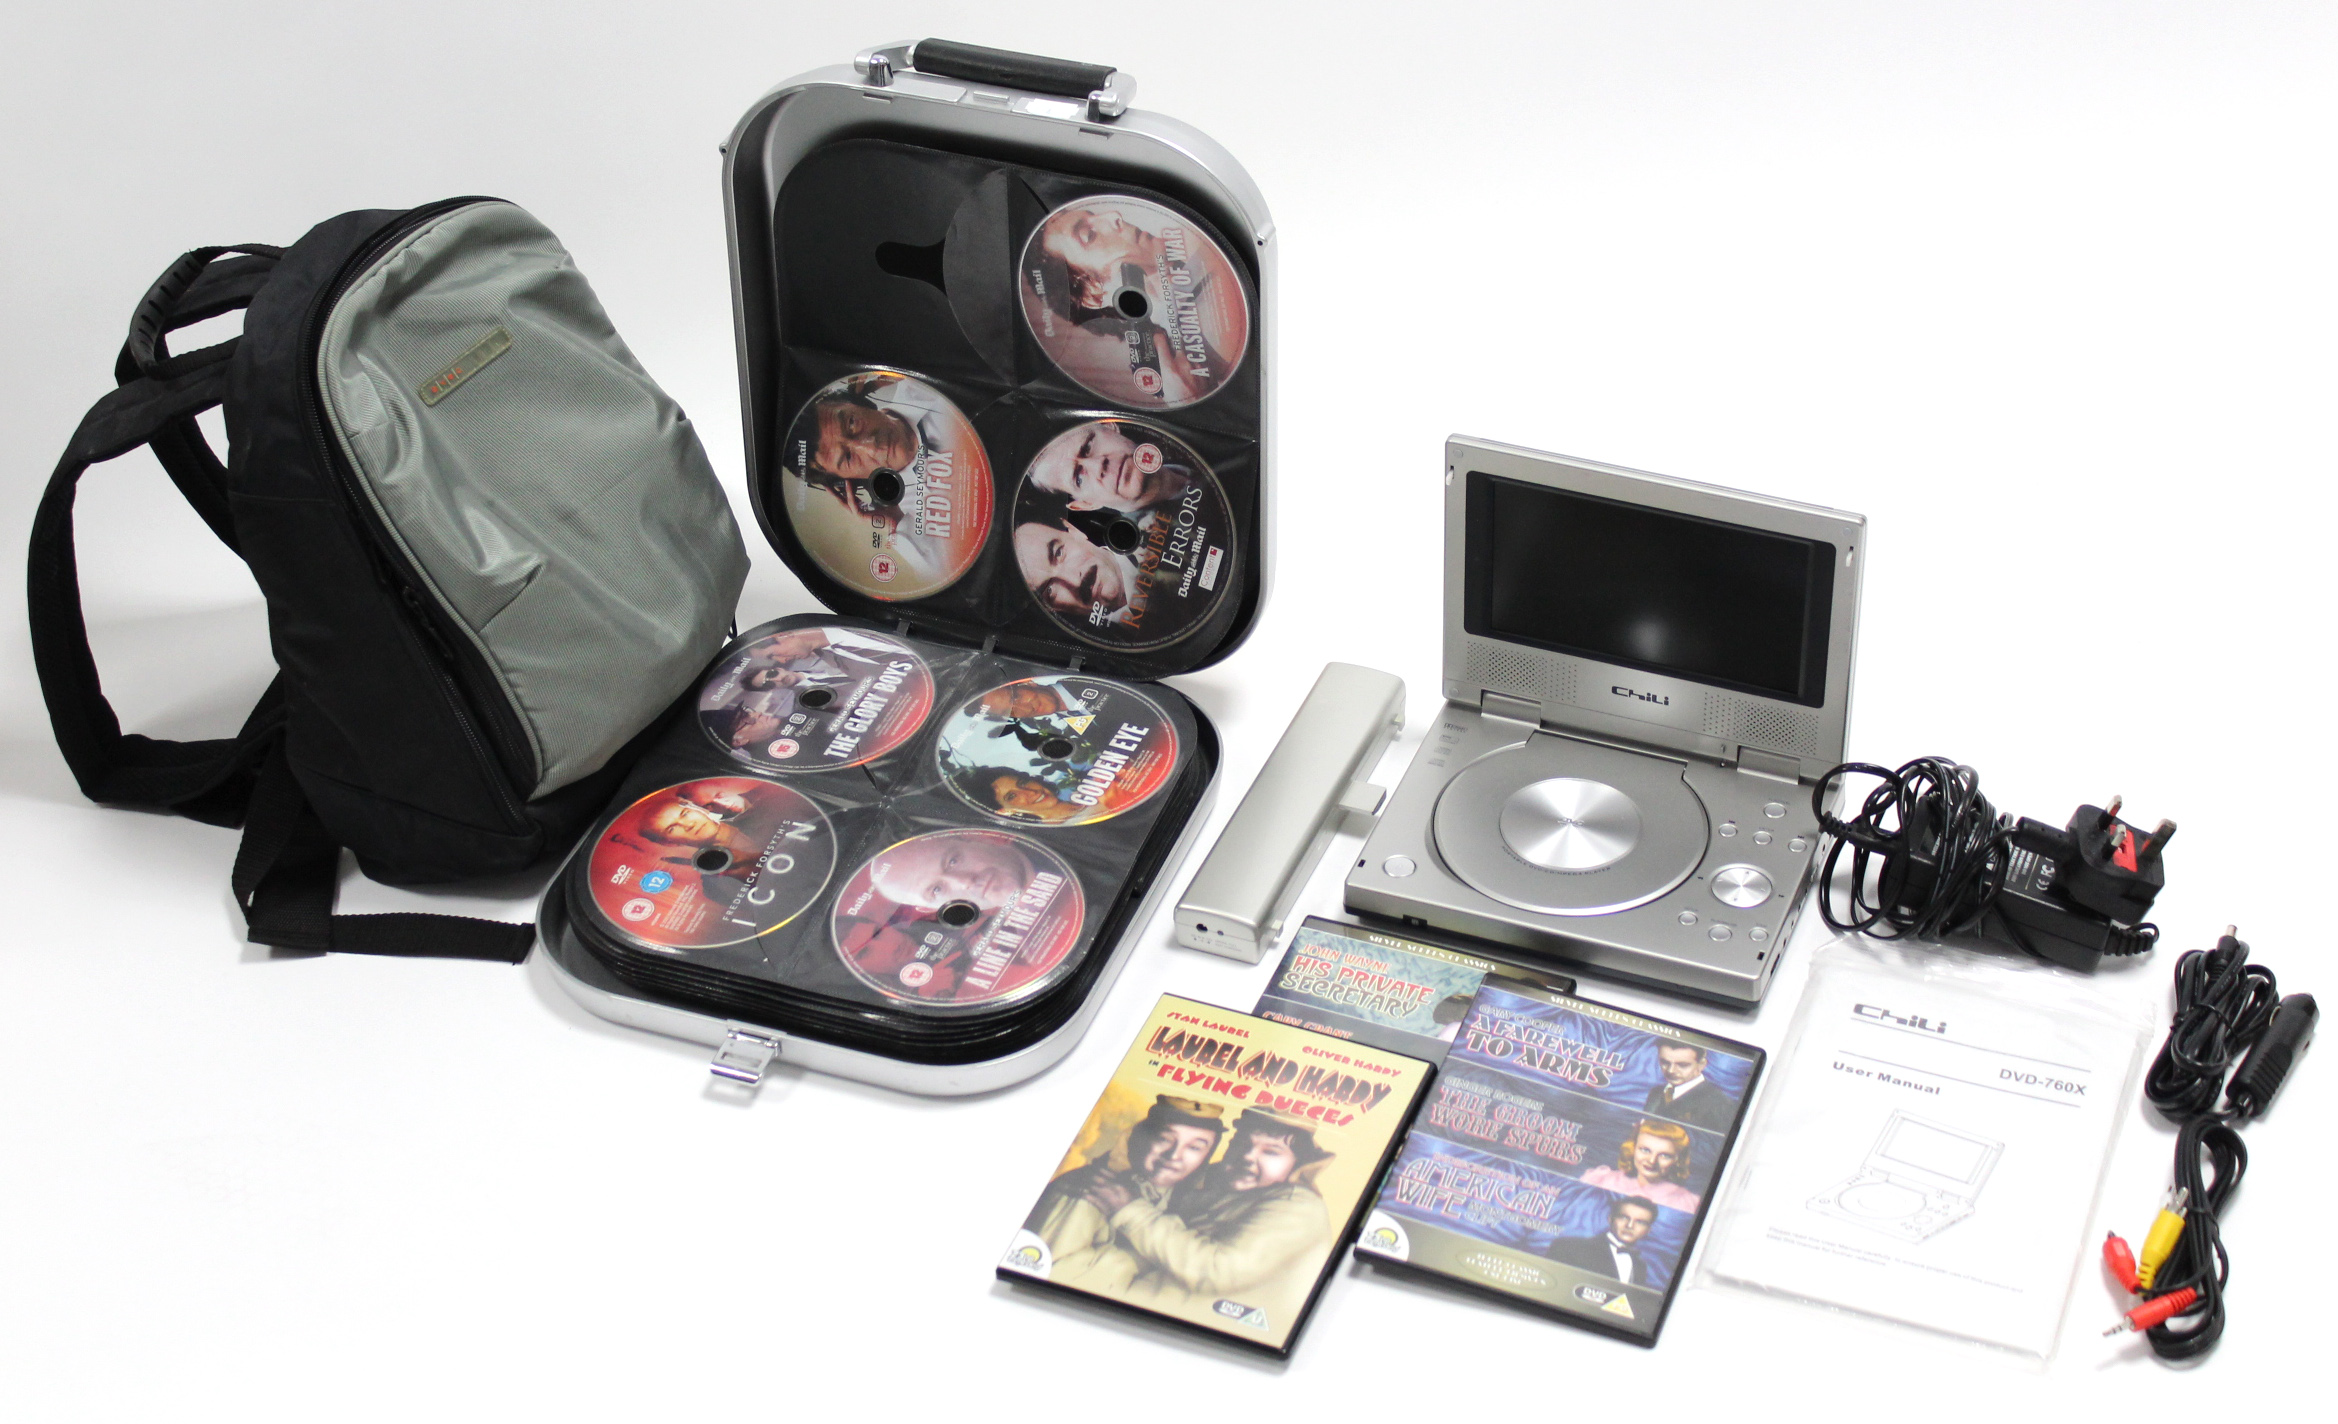 A Chili portable DVD player with remote control, w.o.; & various DVDs.